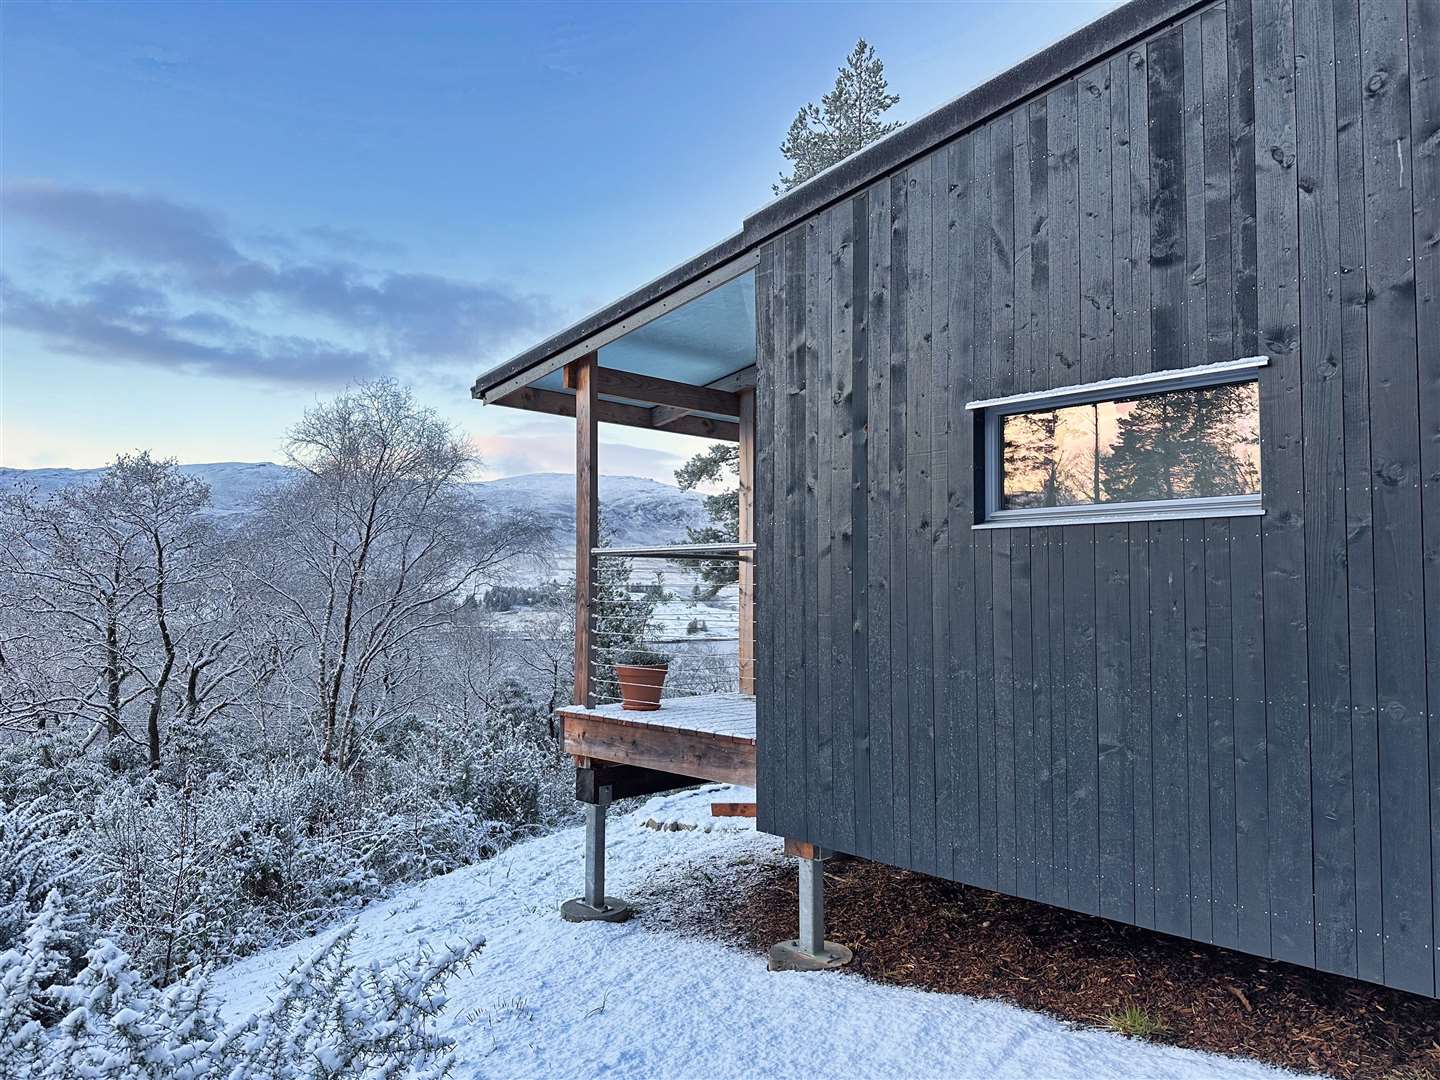 The cabins aim to be as sustainable as possible.